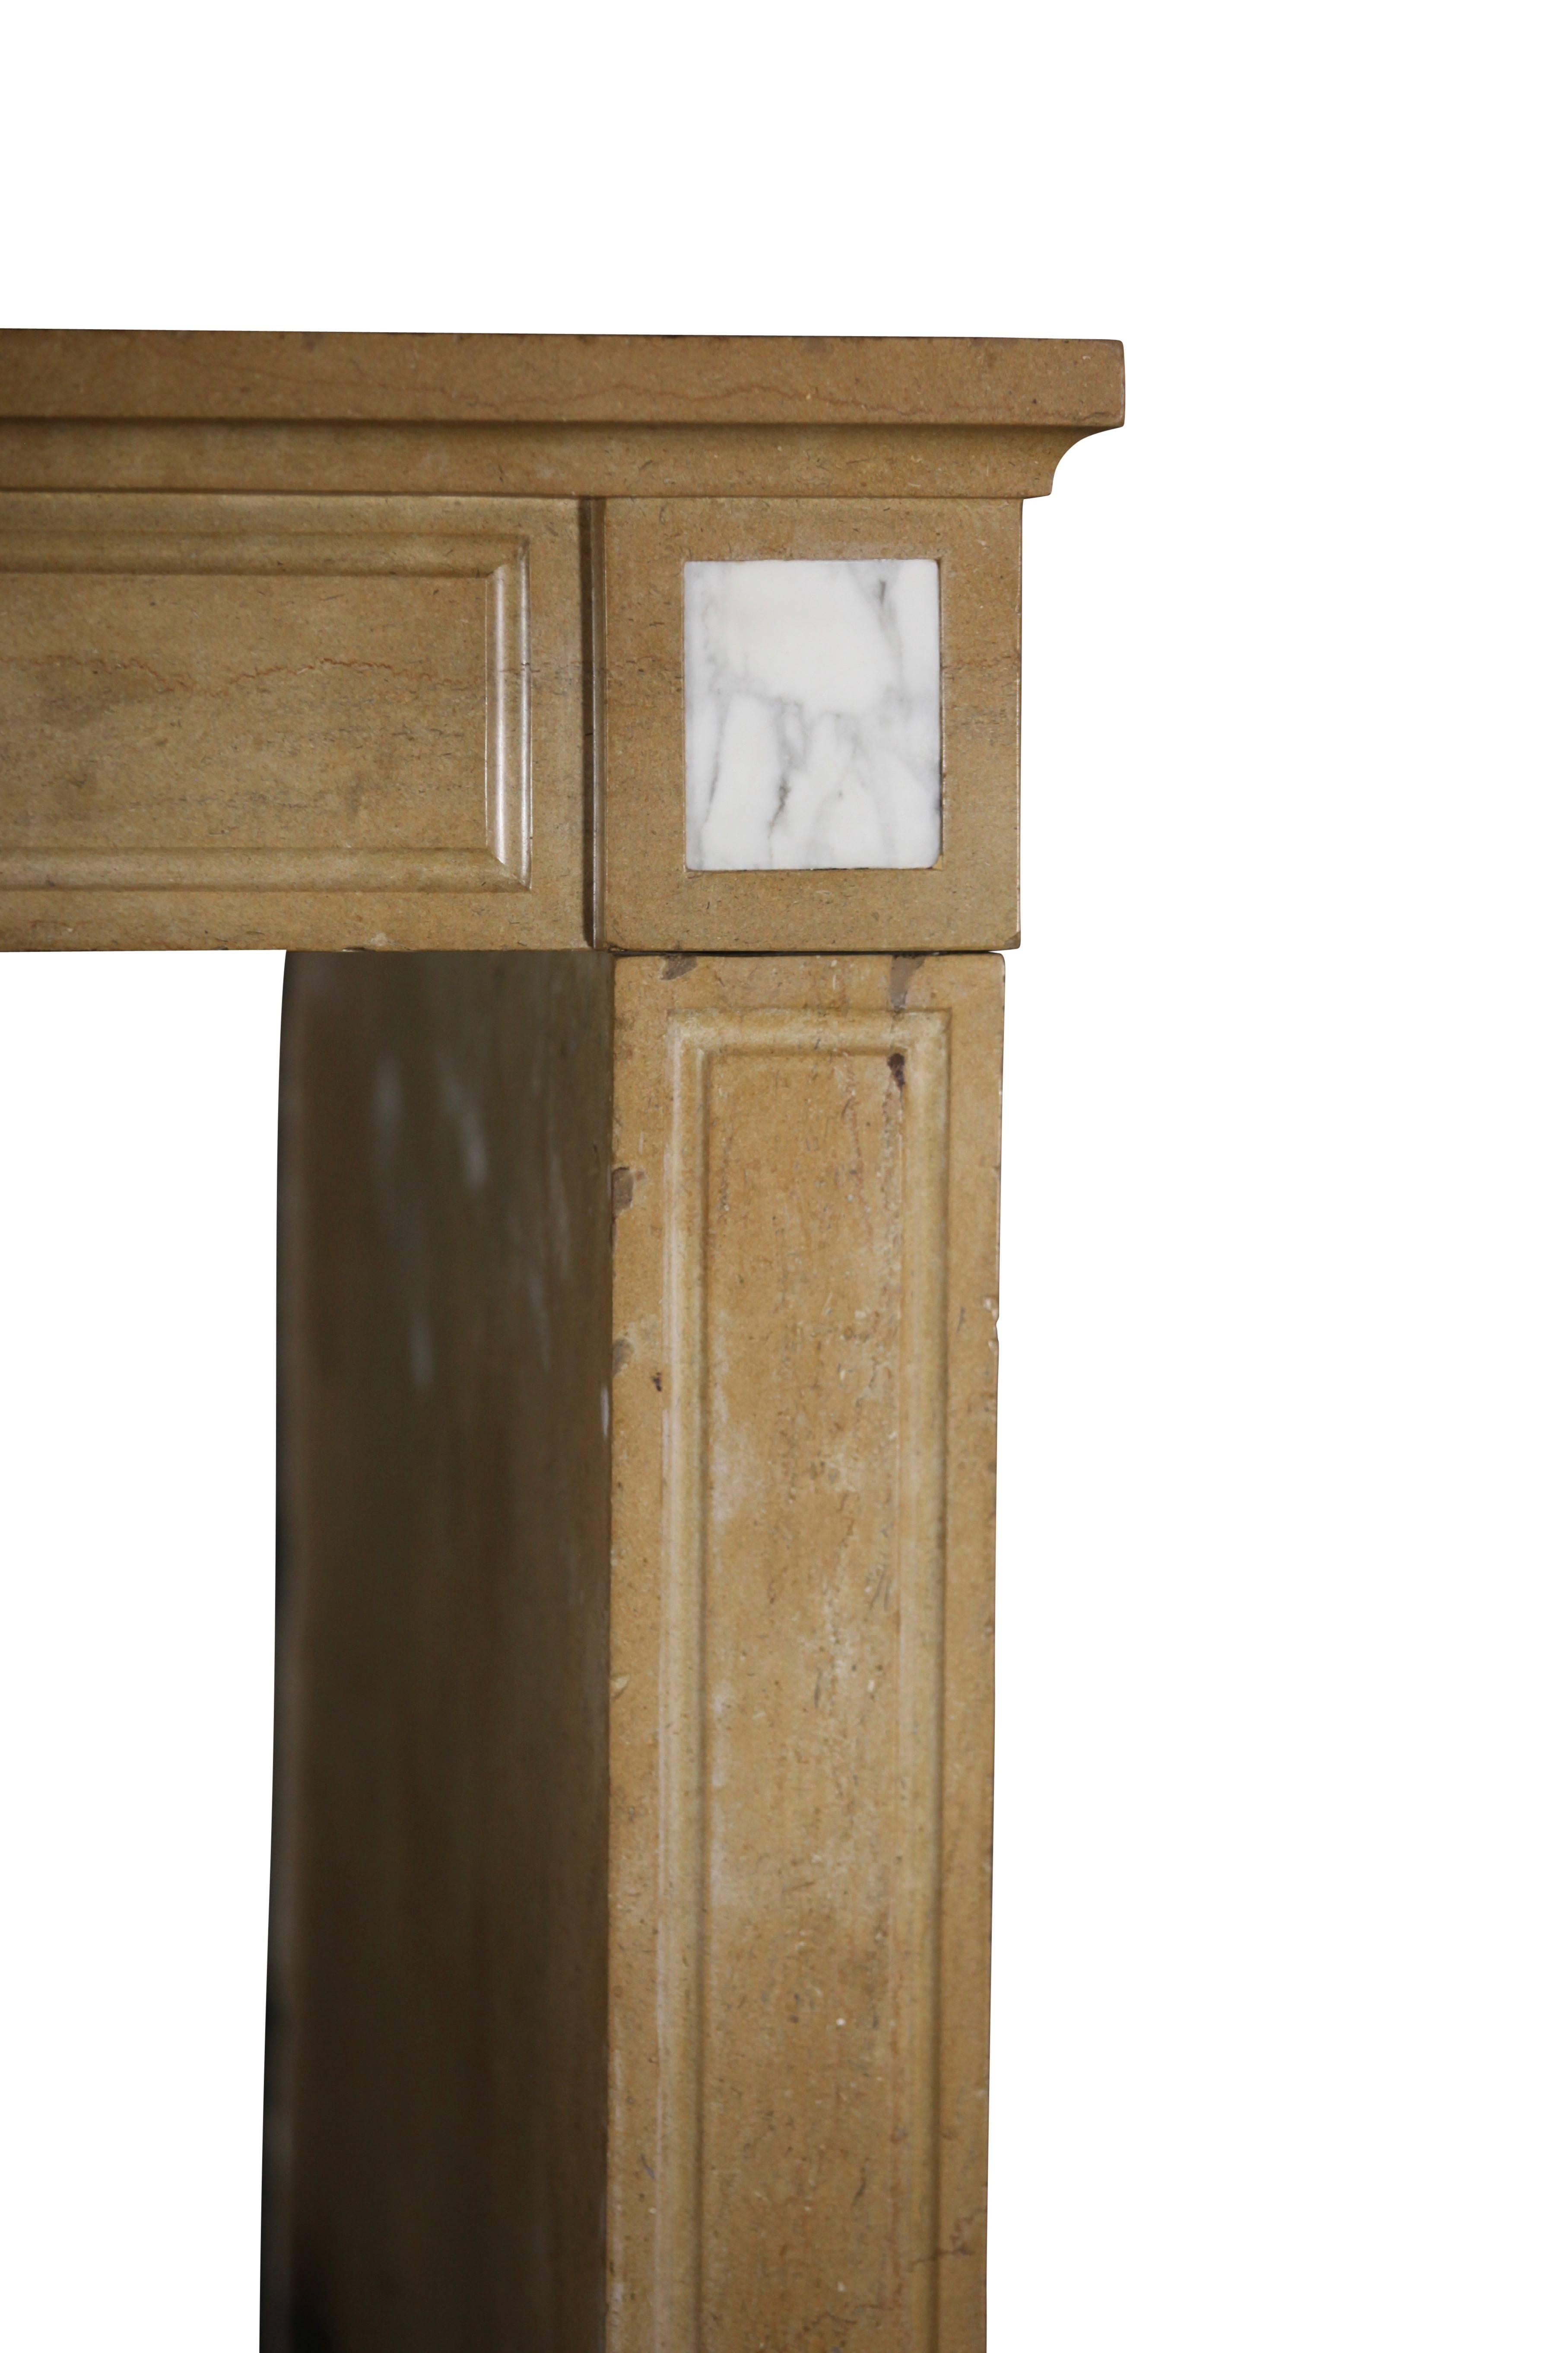 This original hard stone fireplace surround with Carrara marble inlay from the early 19th century It was installed in the Burgundy region in France. The extra deep legs with side piece are suitable for an build around mantel.

Measures:
150 cm EW